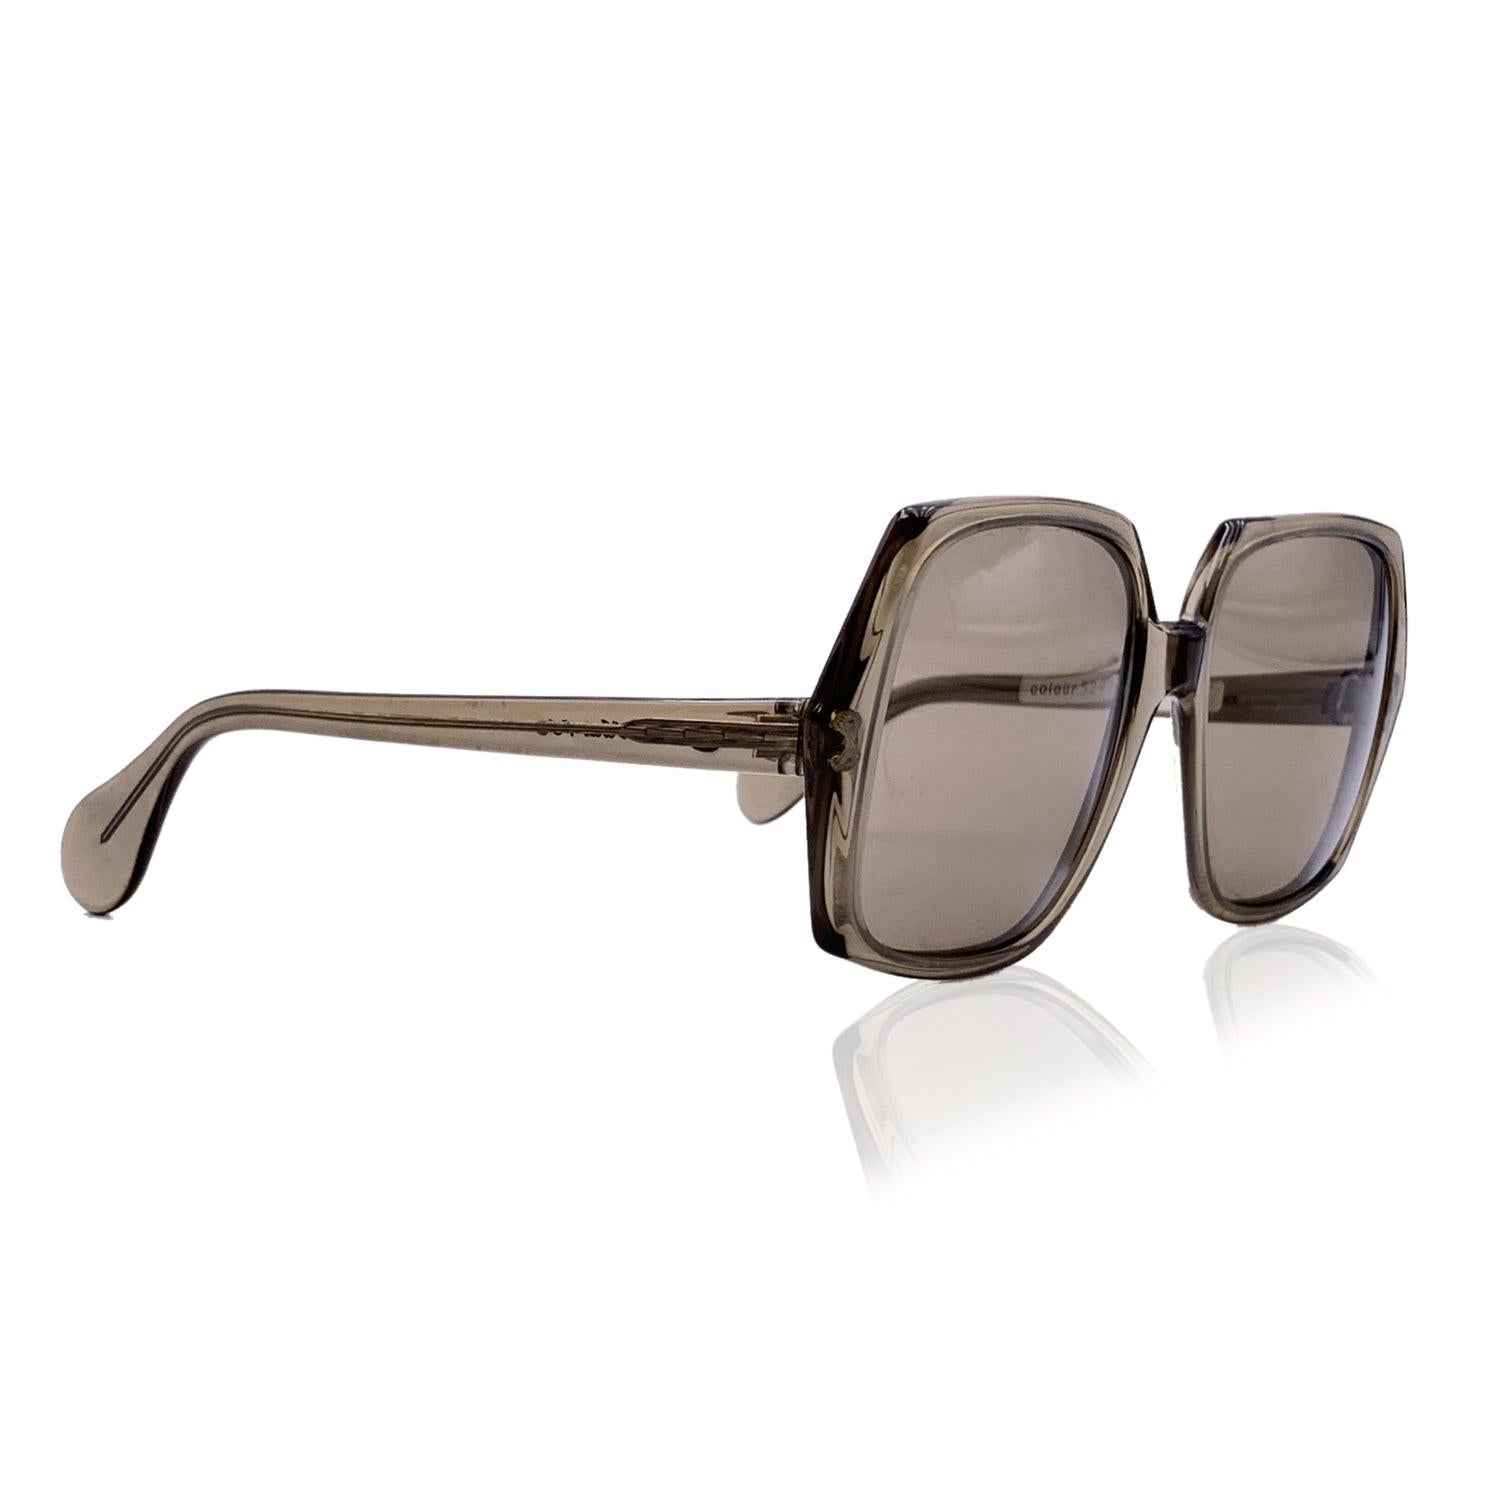 Rare Designer Sunglasses by genious SERGE KIRCHHOFER. Made in Austria, during the early 1970s. Semi transparent oversized squared frame, original light grey 100% UV Lens. Model: 465. They will come with their soft orginal case. Details MATERIAL: